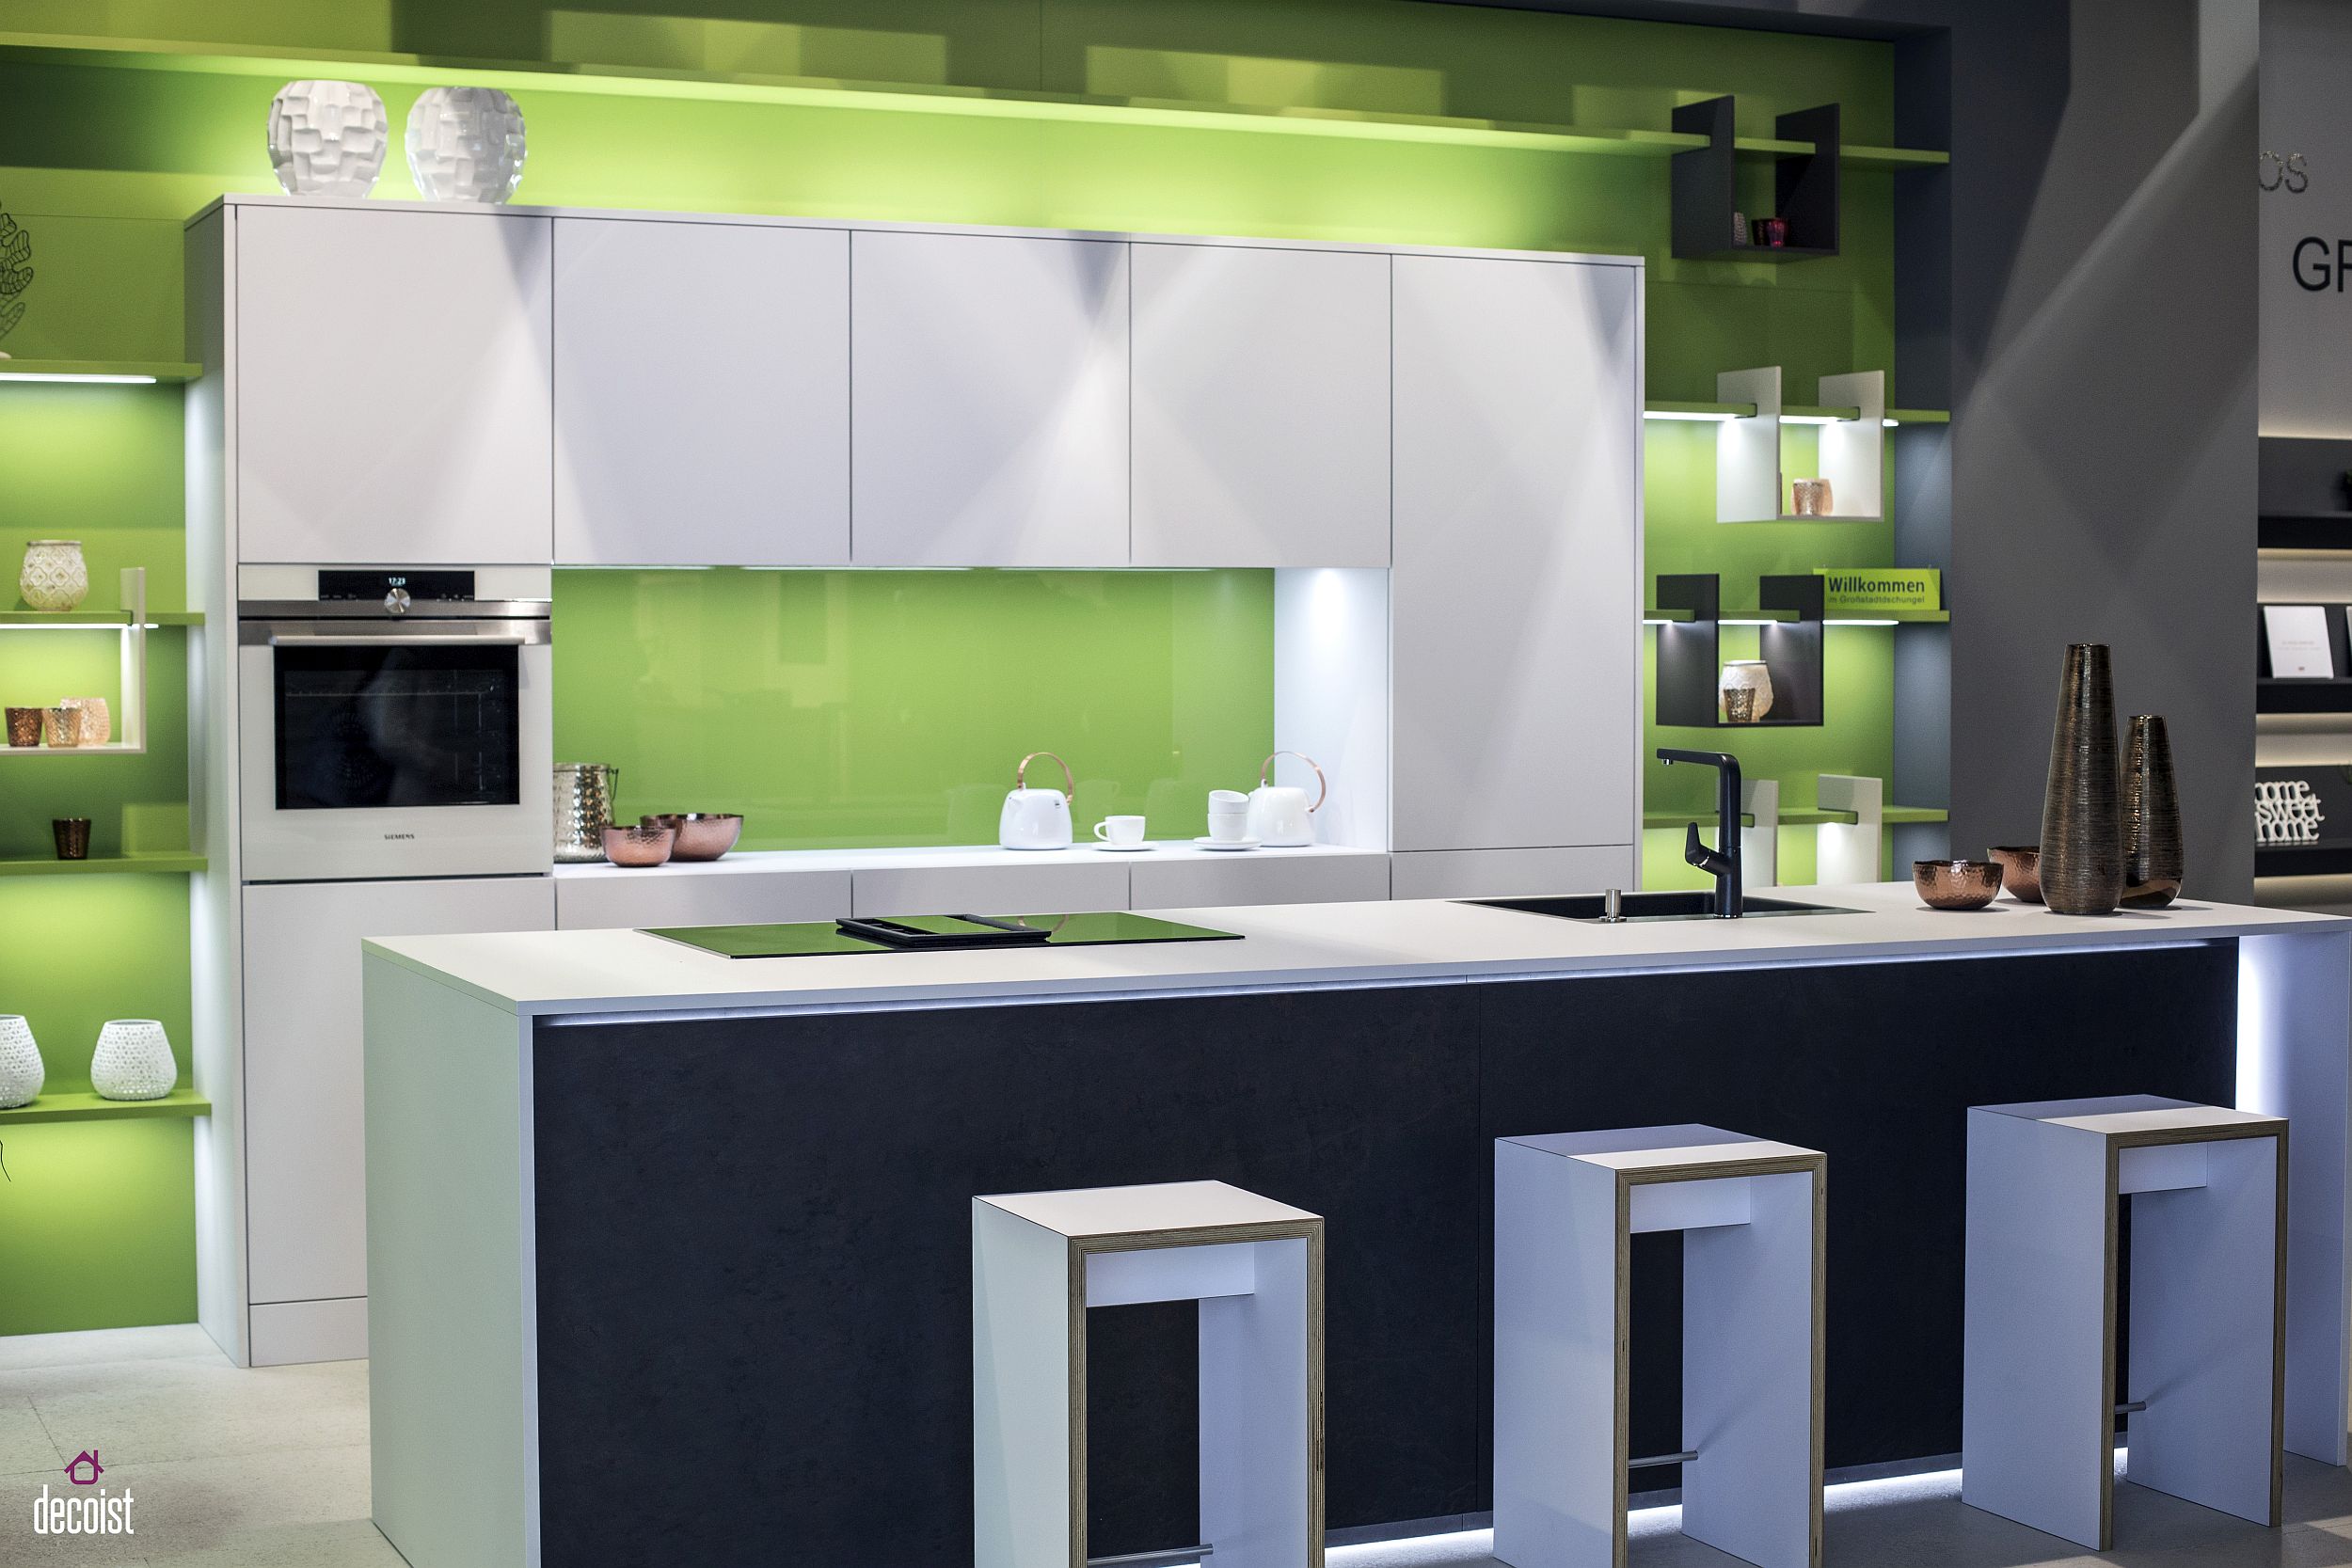 Modern kitchen in lime green and white with plenty of shelf space